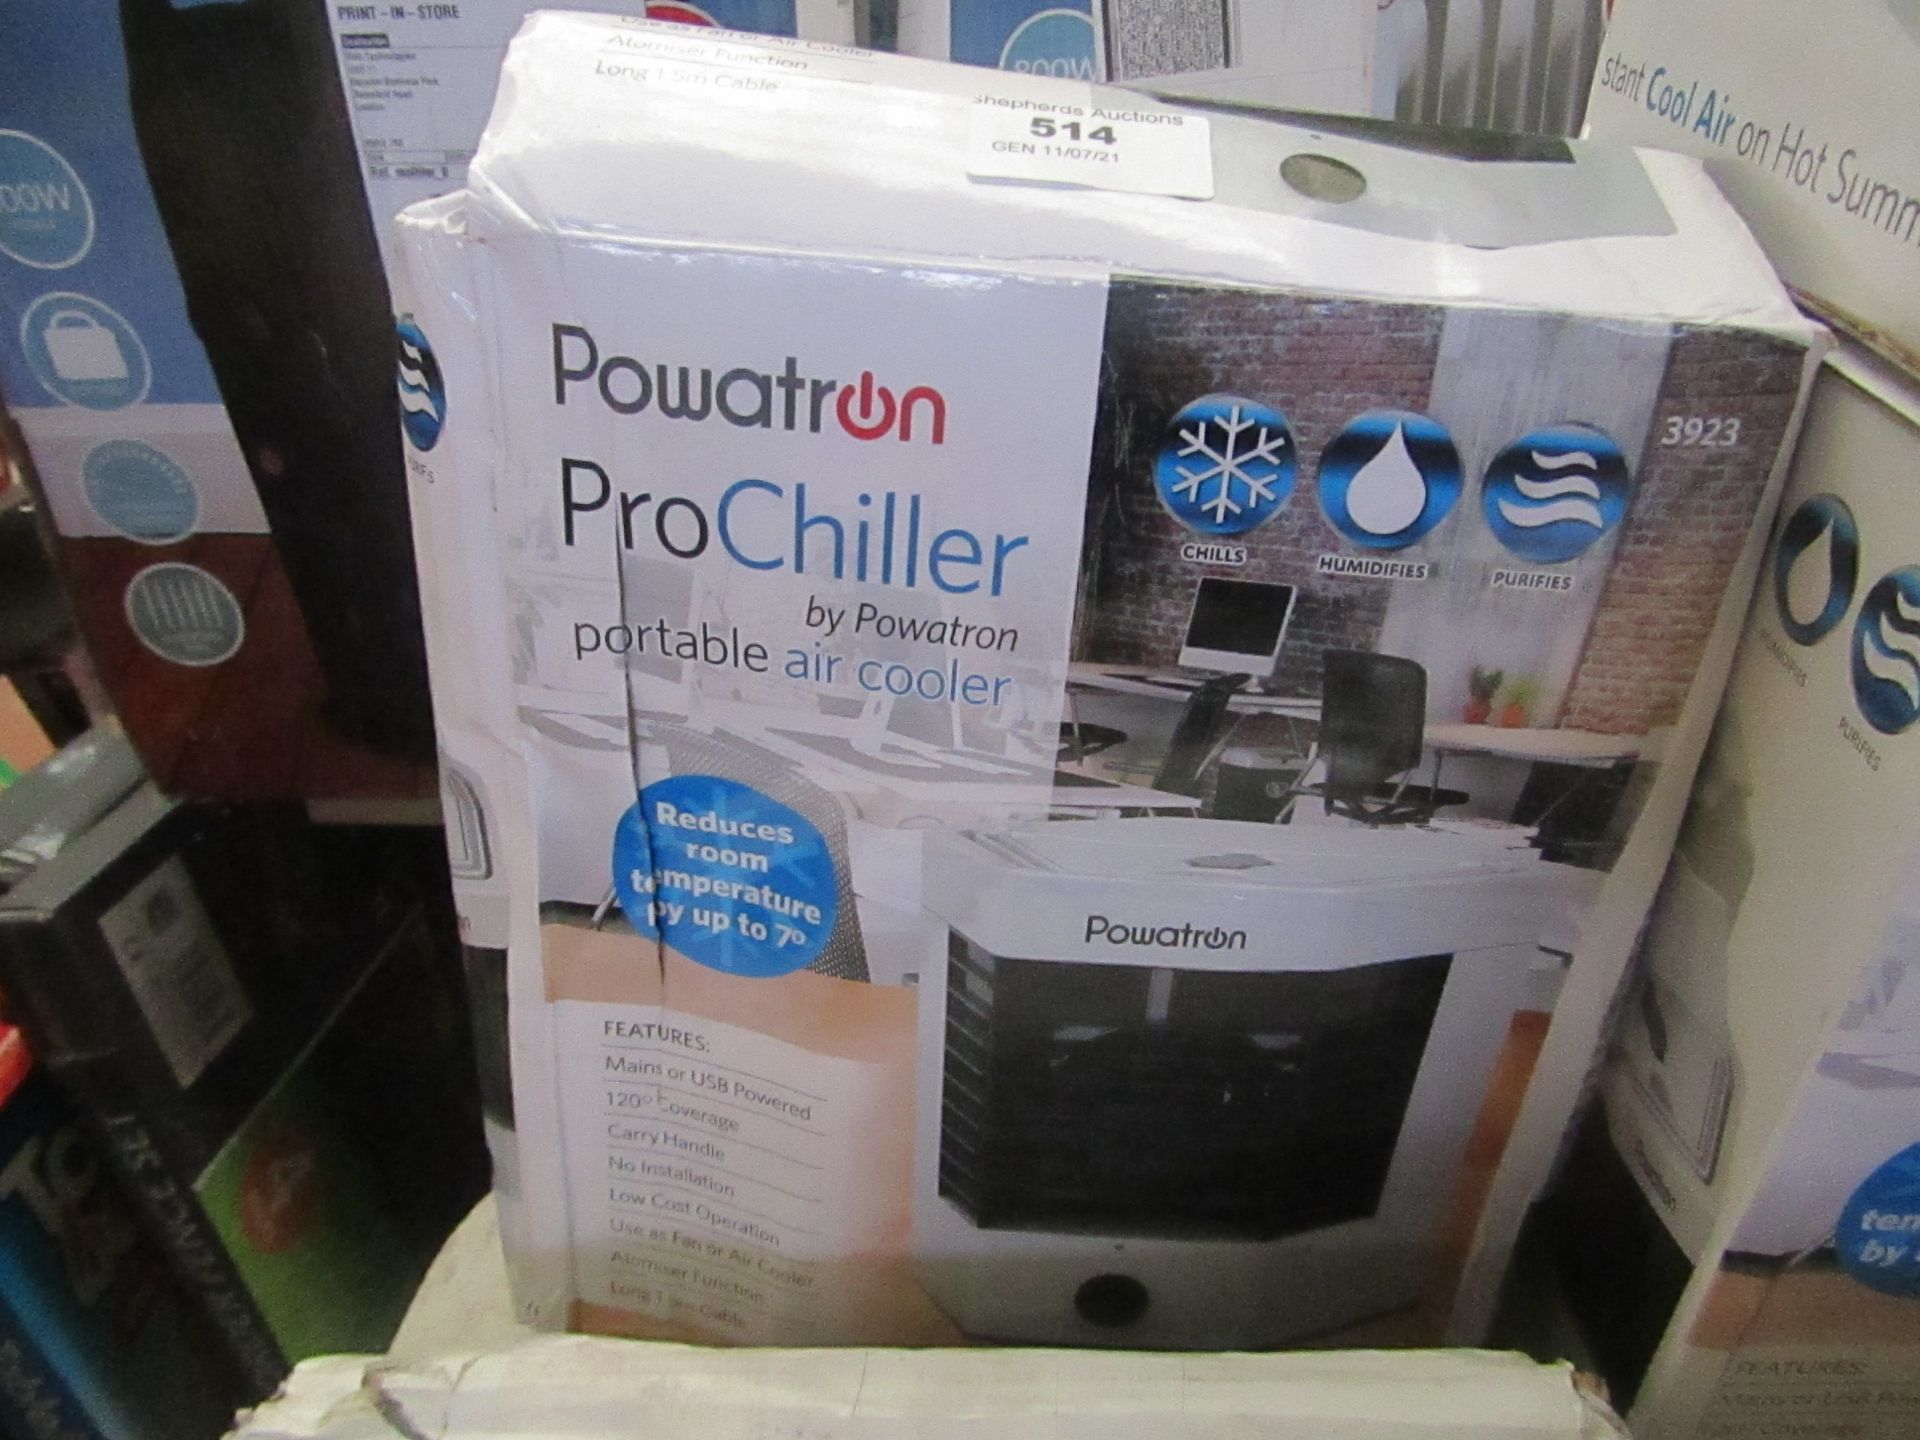 1x powatron pro chiller portable air cooler, unchecked and boxed.